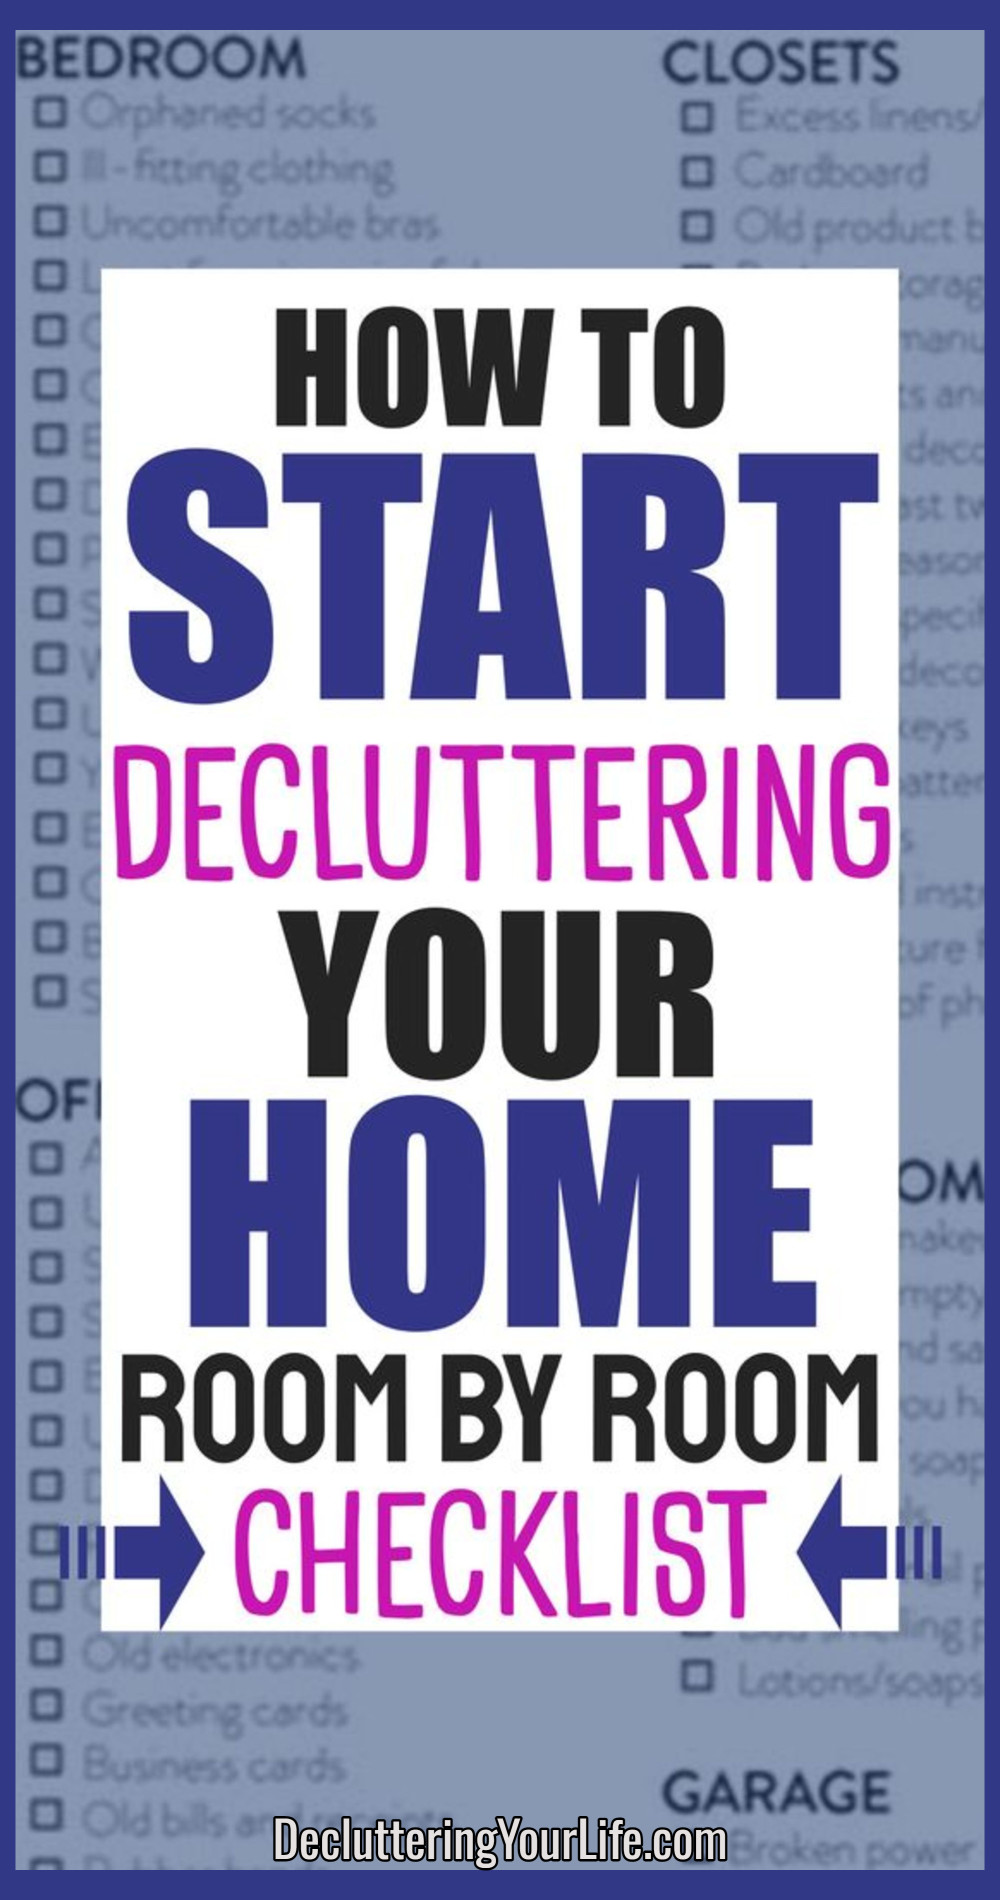 How To Start Decluttering Your Home Room By Room Checklist